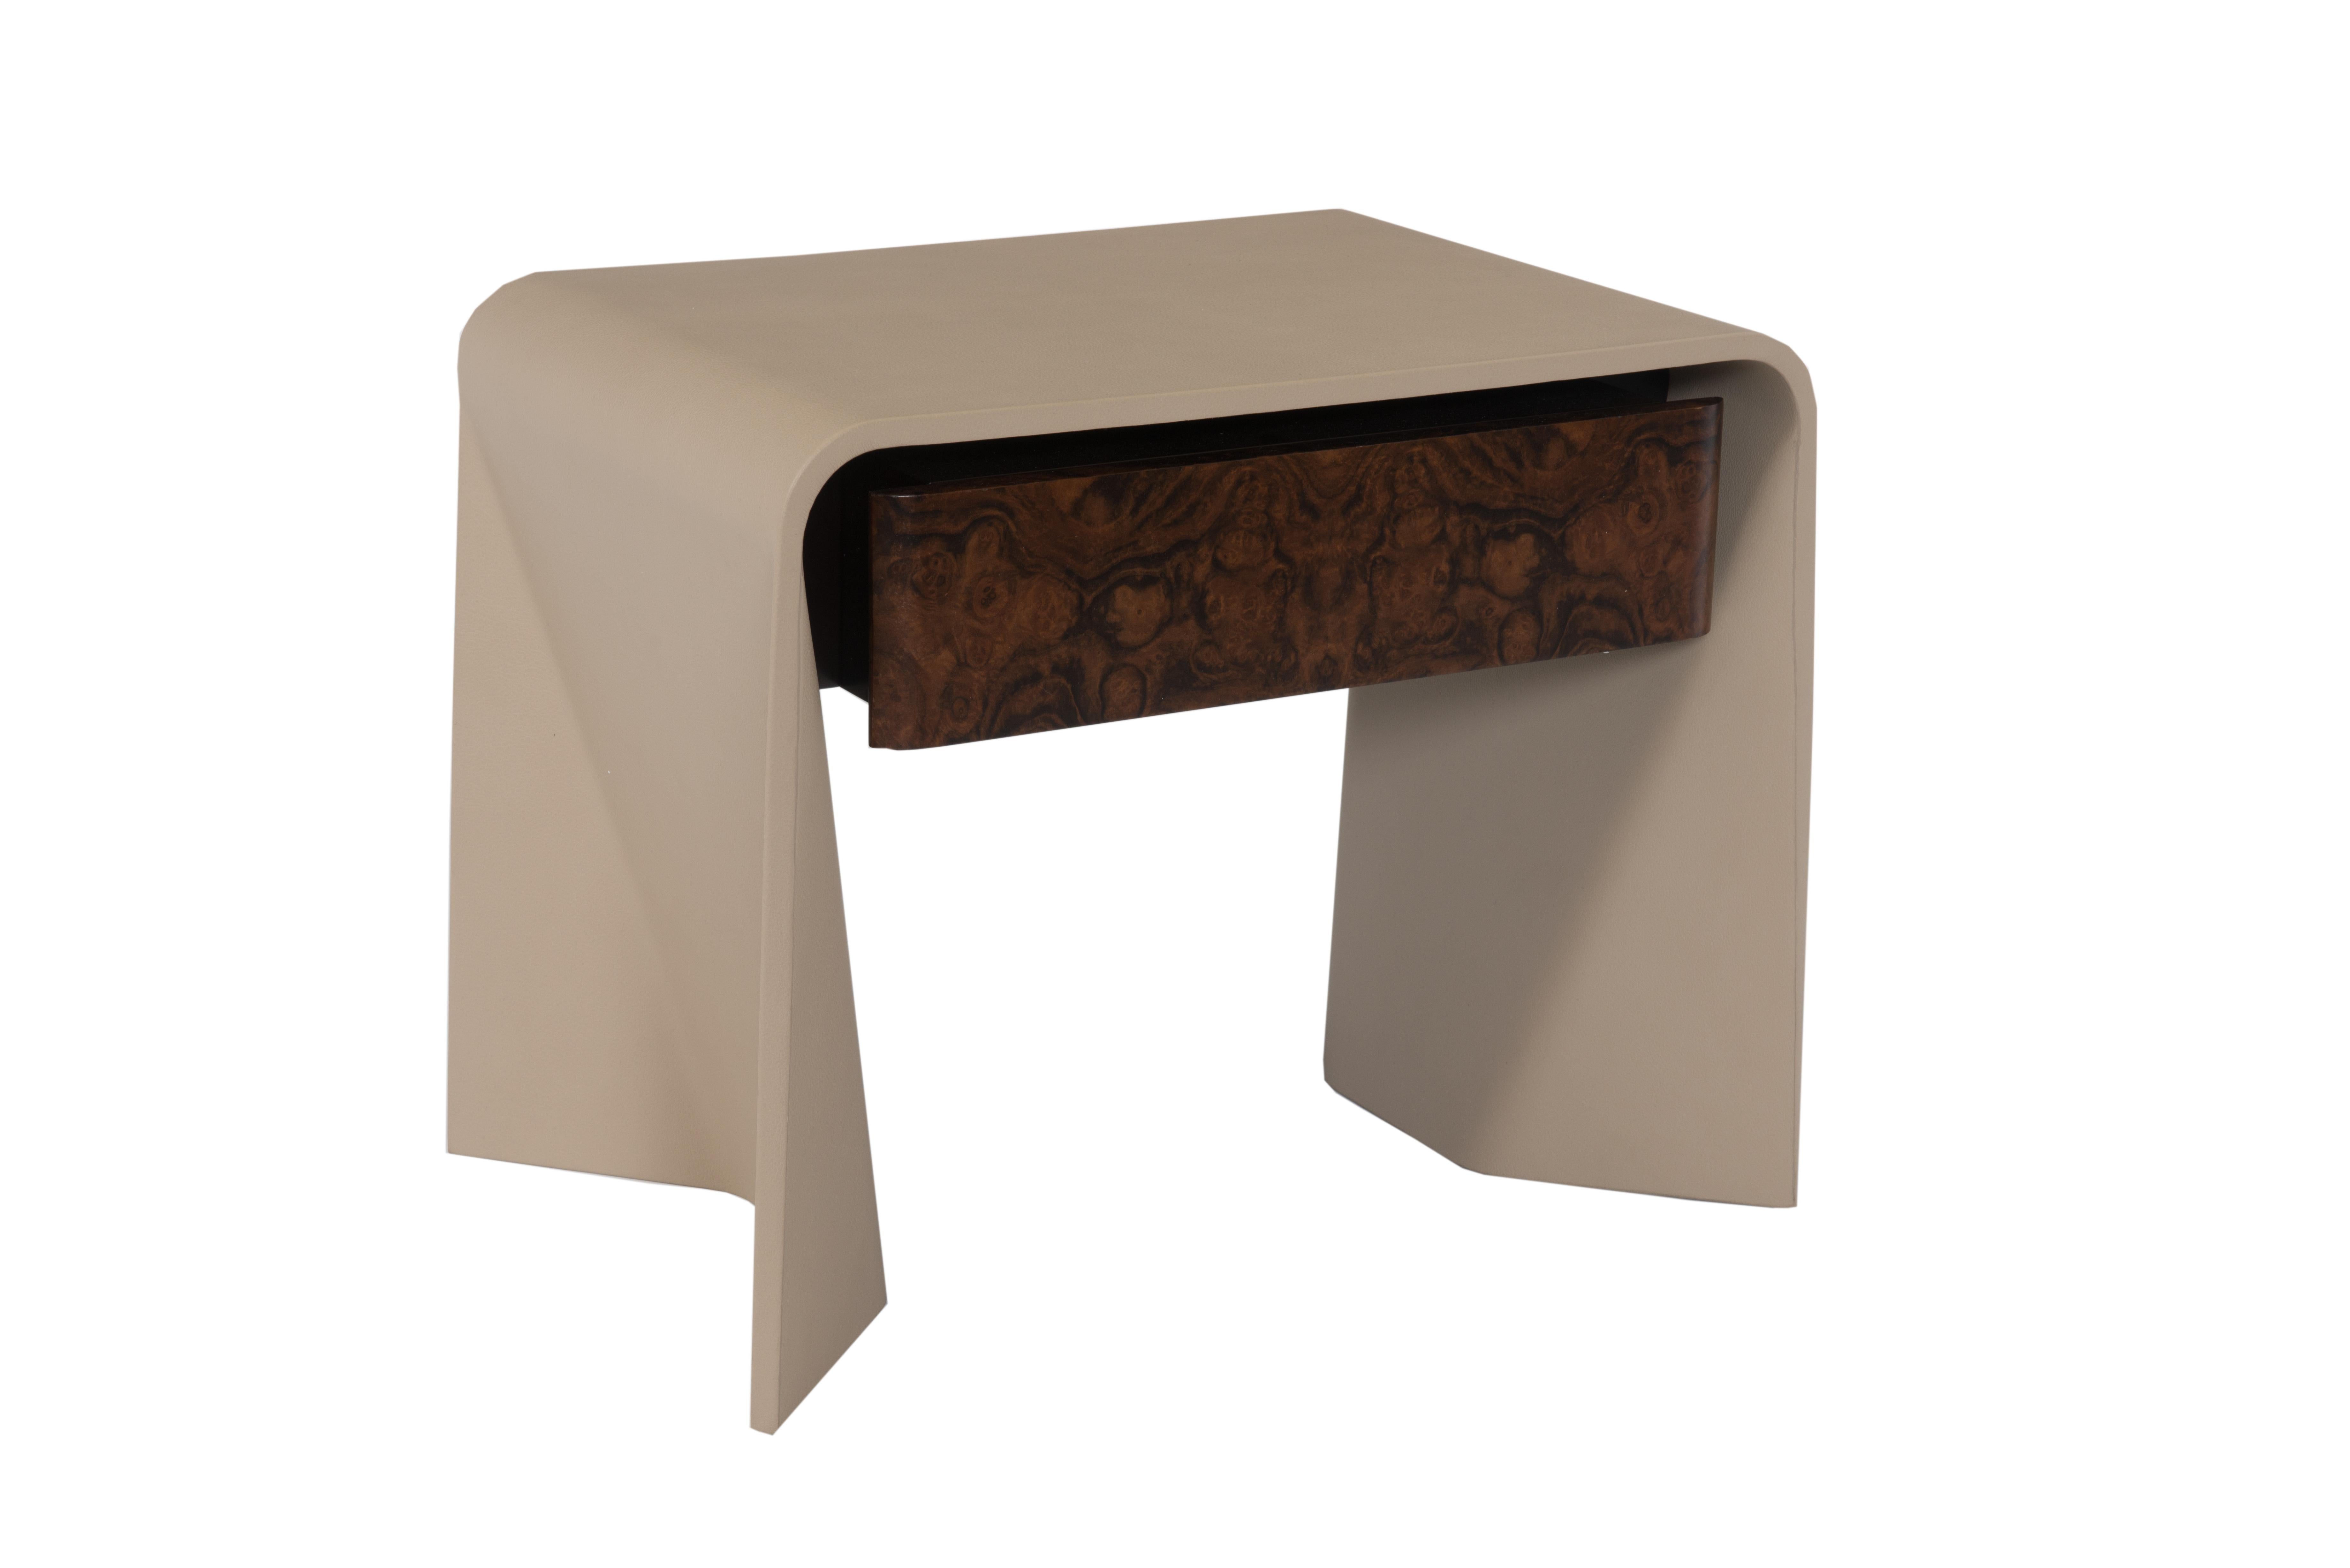 Rectangular bentwood end table featuring one drawer in a burled walnut veneer and a tortora color leather body. Made by bending thin pieces of wood, Tendu is a ballet term meaning 'stretched'. Tendu is offered with a choice of leather or lacquer